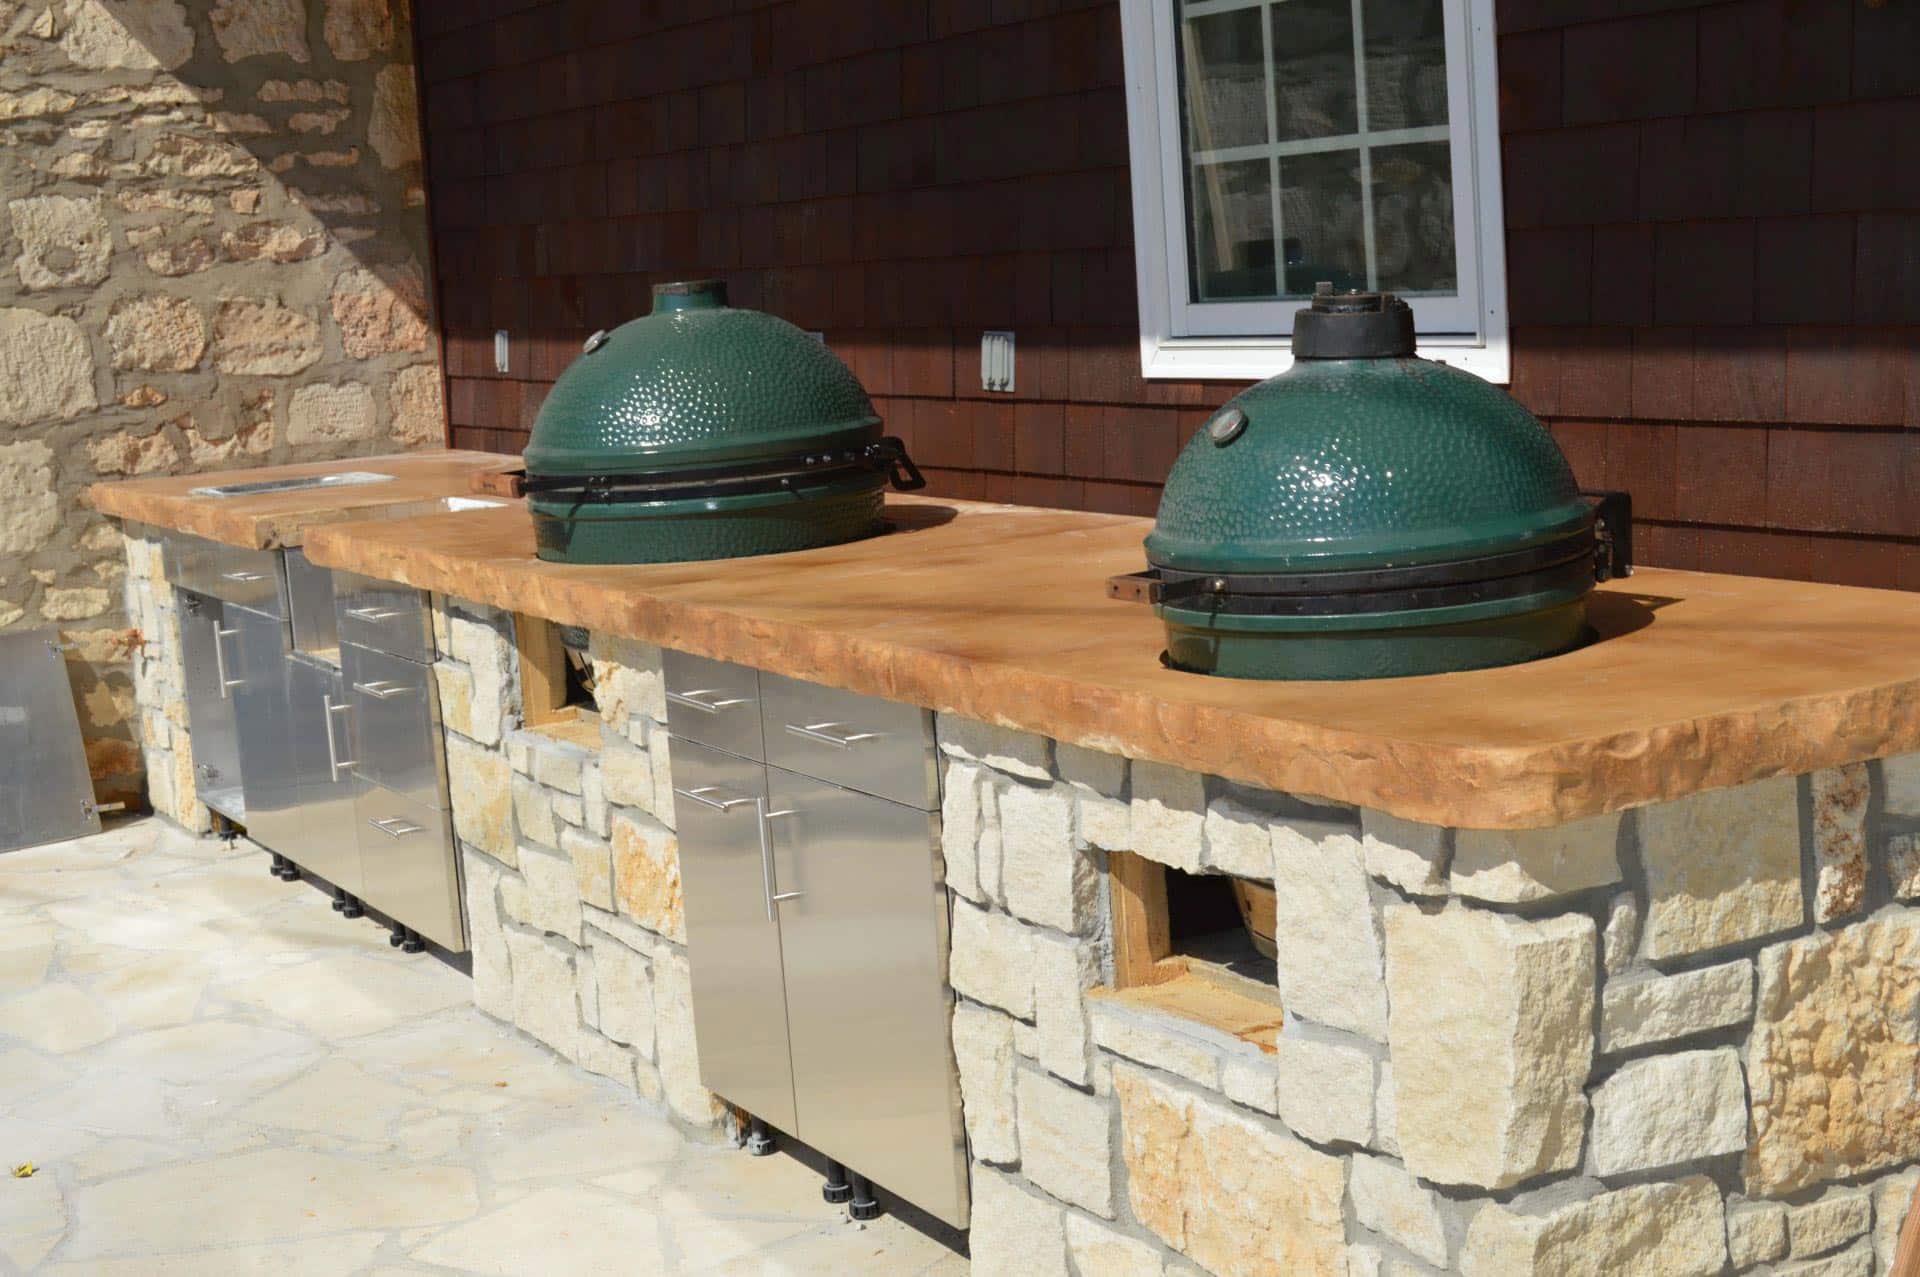 exterior concrete counter tops with two grills inserted